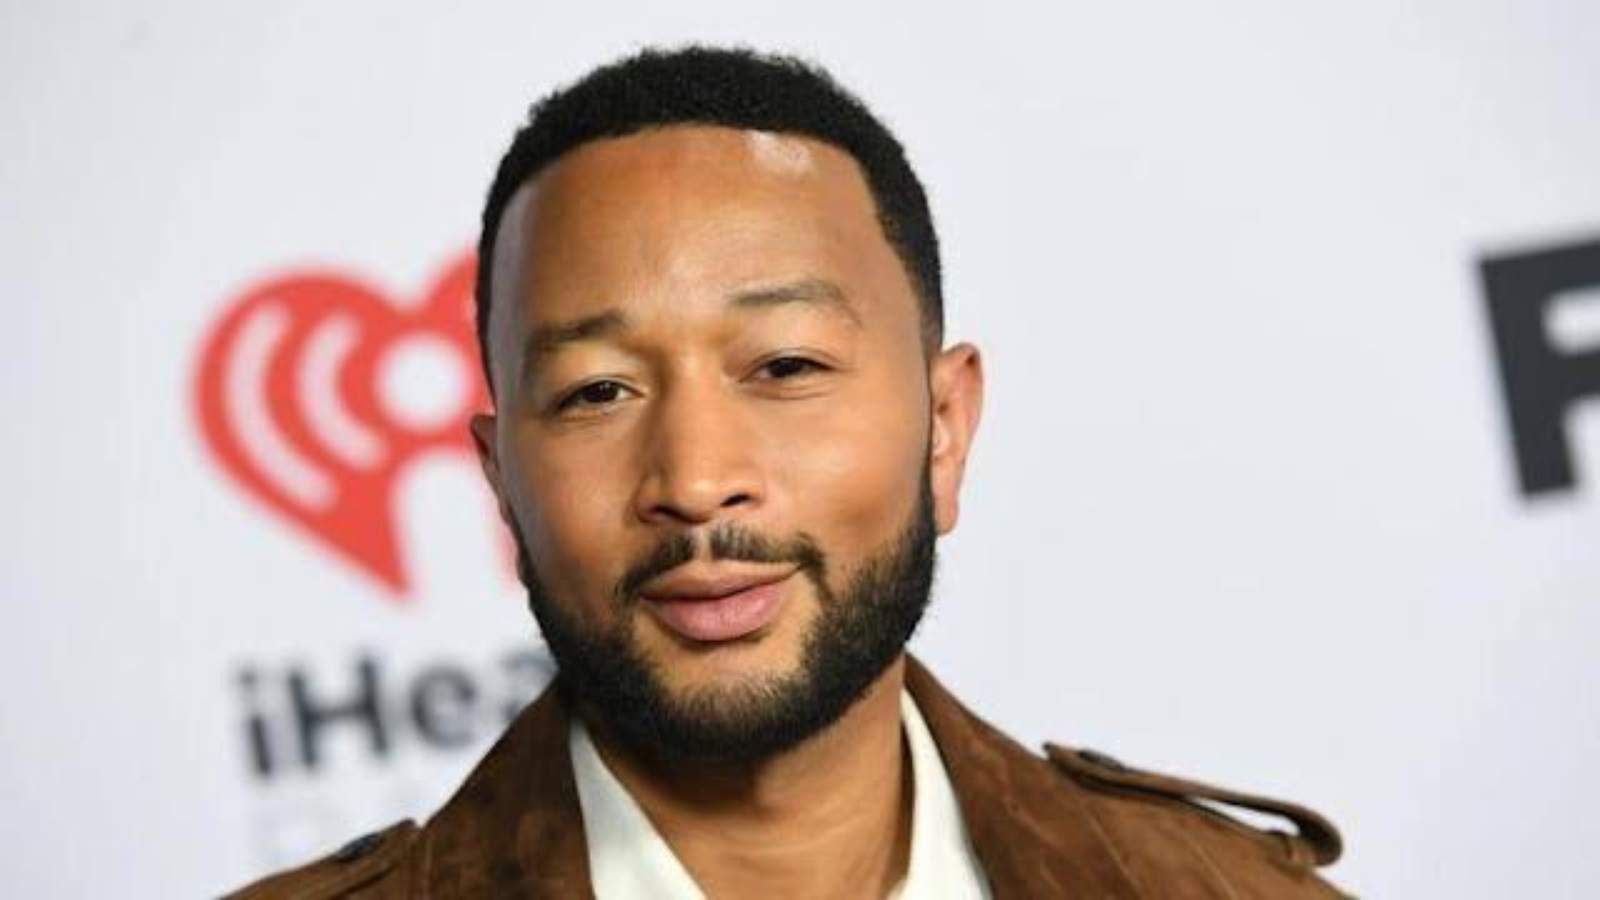 John Legend pursued a degree in English before pursuing music